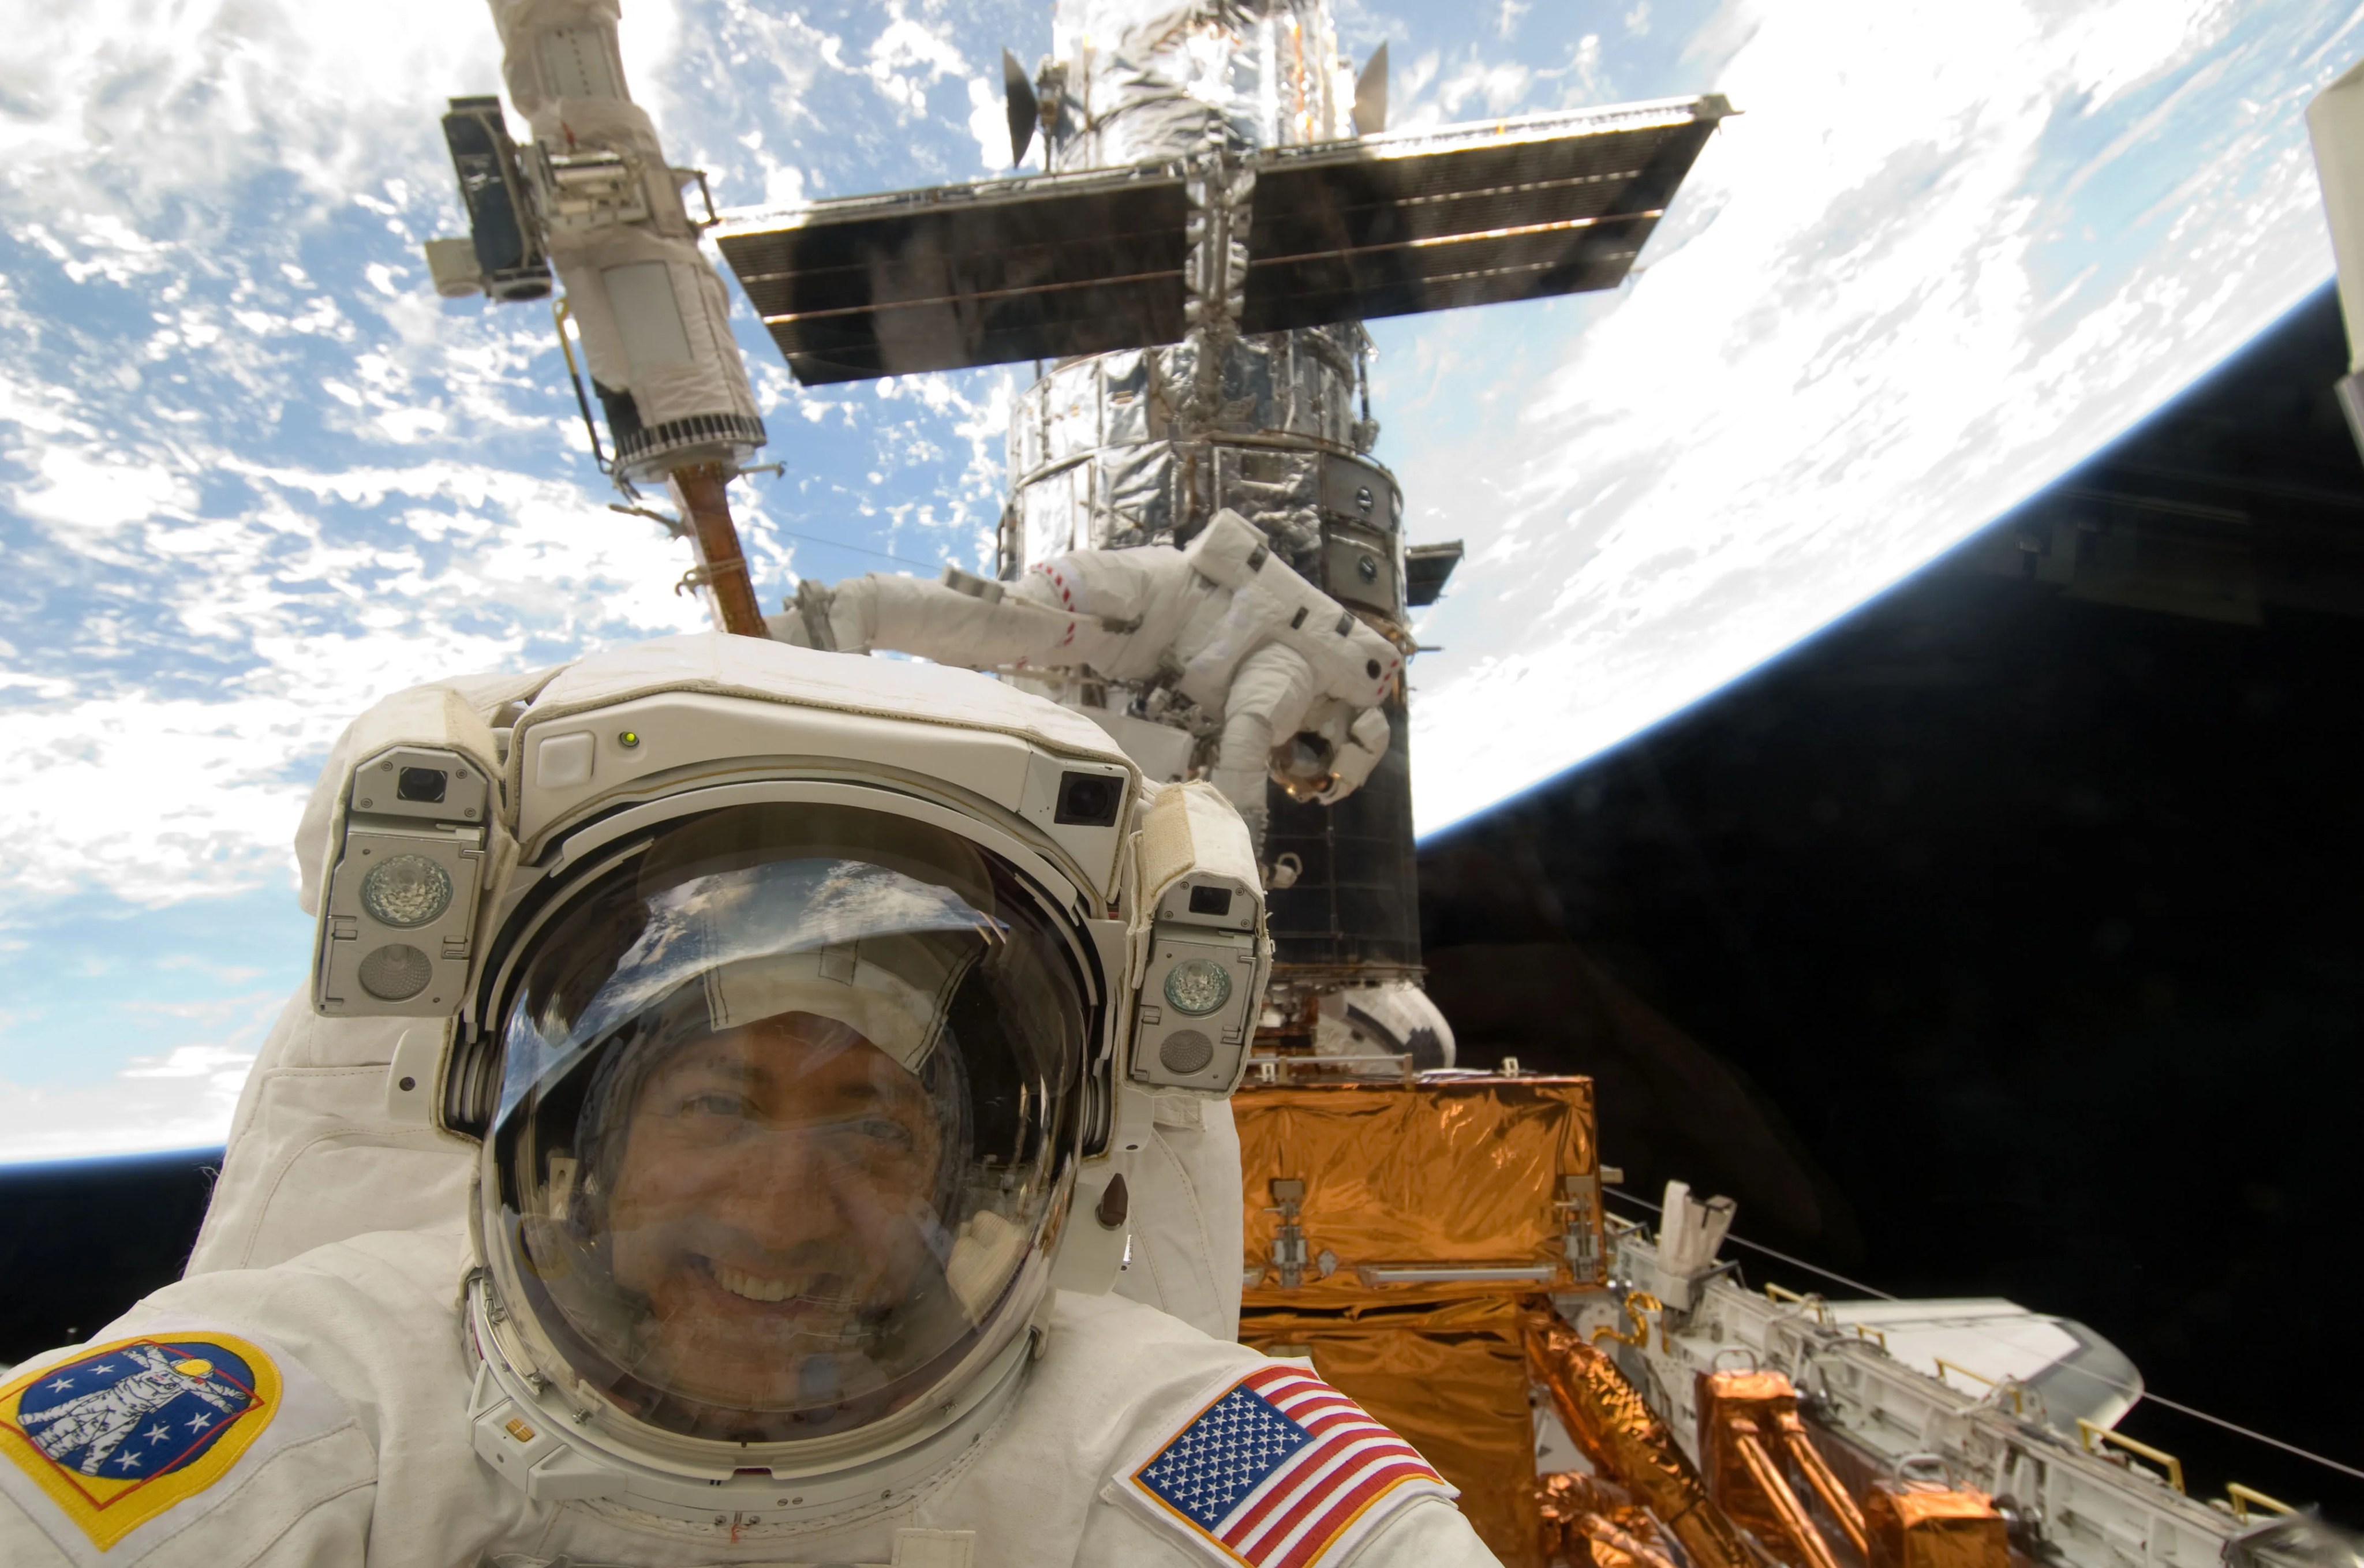 Astronaut in a white space suit smiling in a selfie with a crewmate, the Hubble Space Telescope and the Earth in the background.